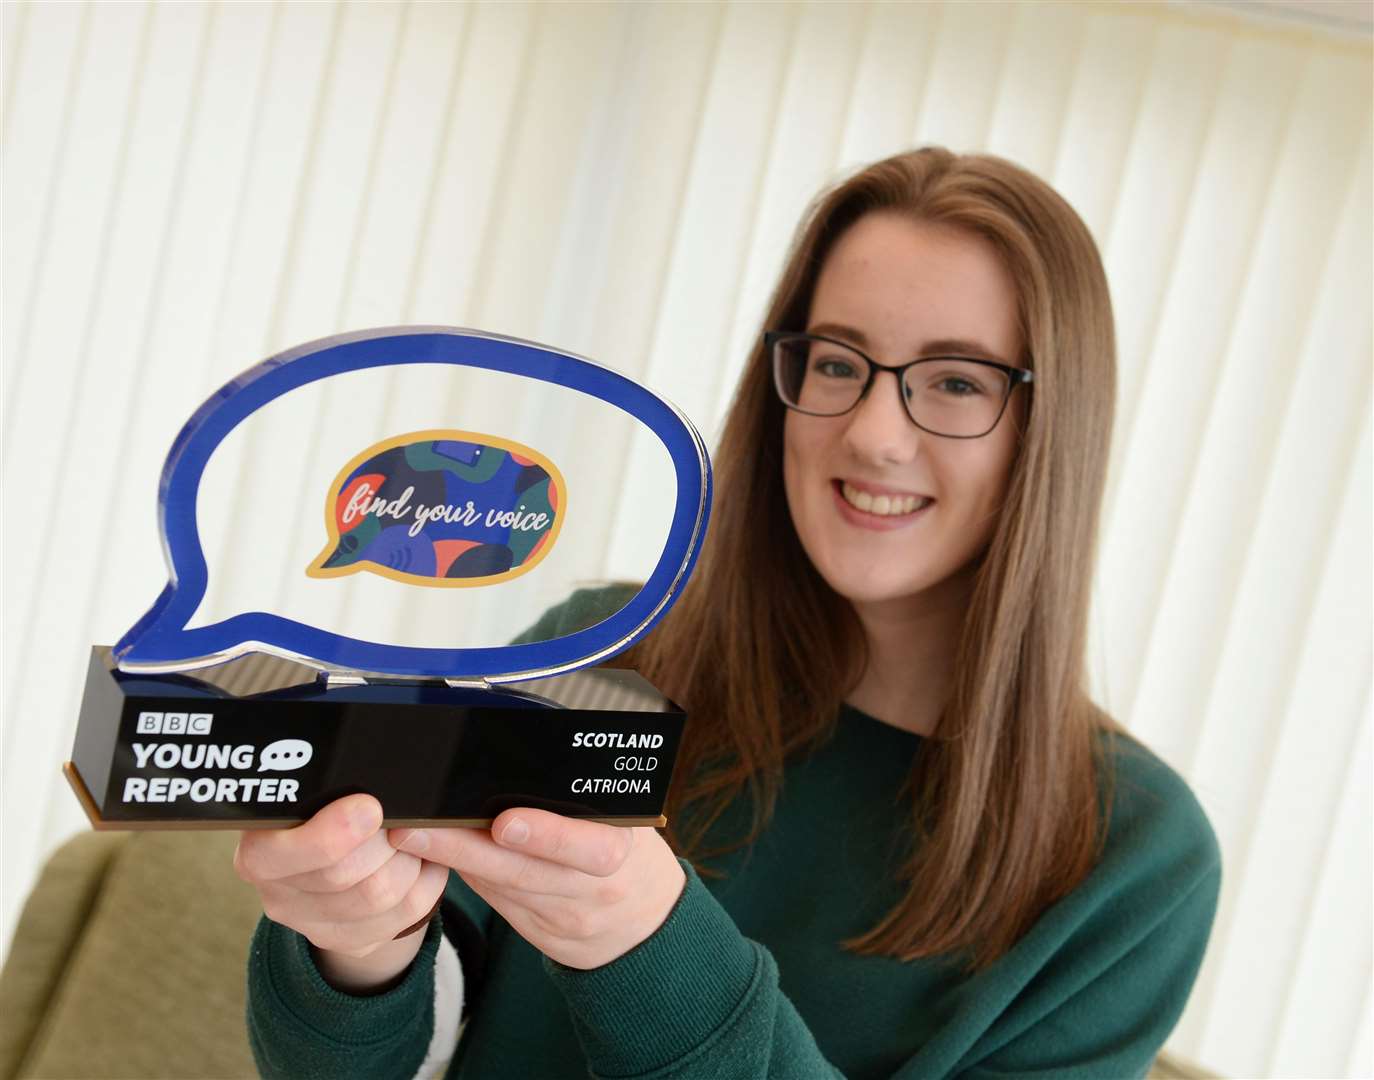 Catriona Munns has won Scotland's BBC young reporter of the year prize.